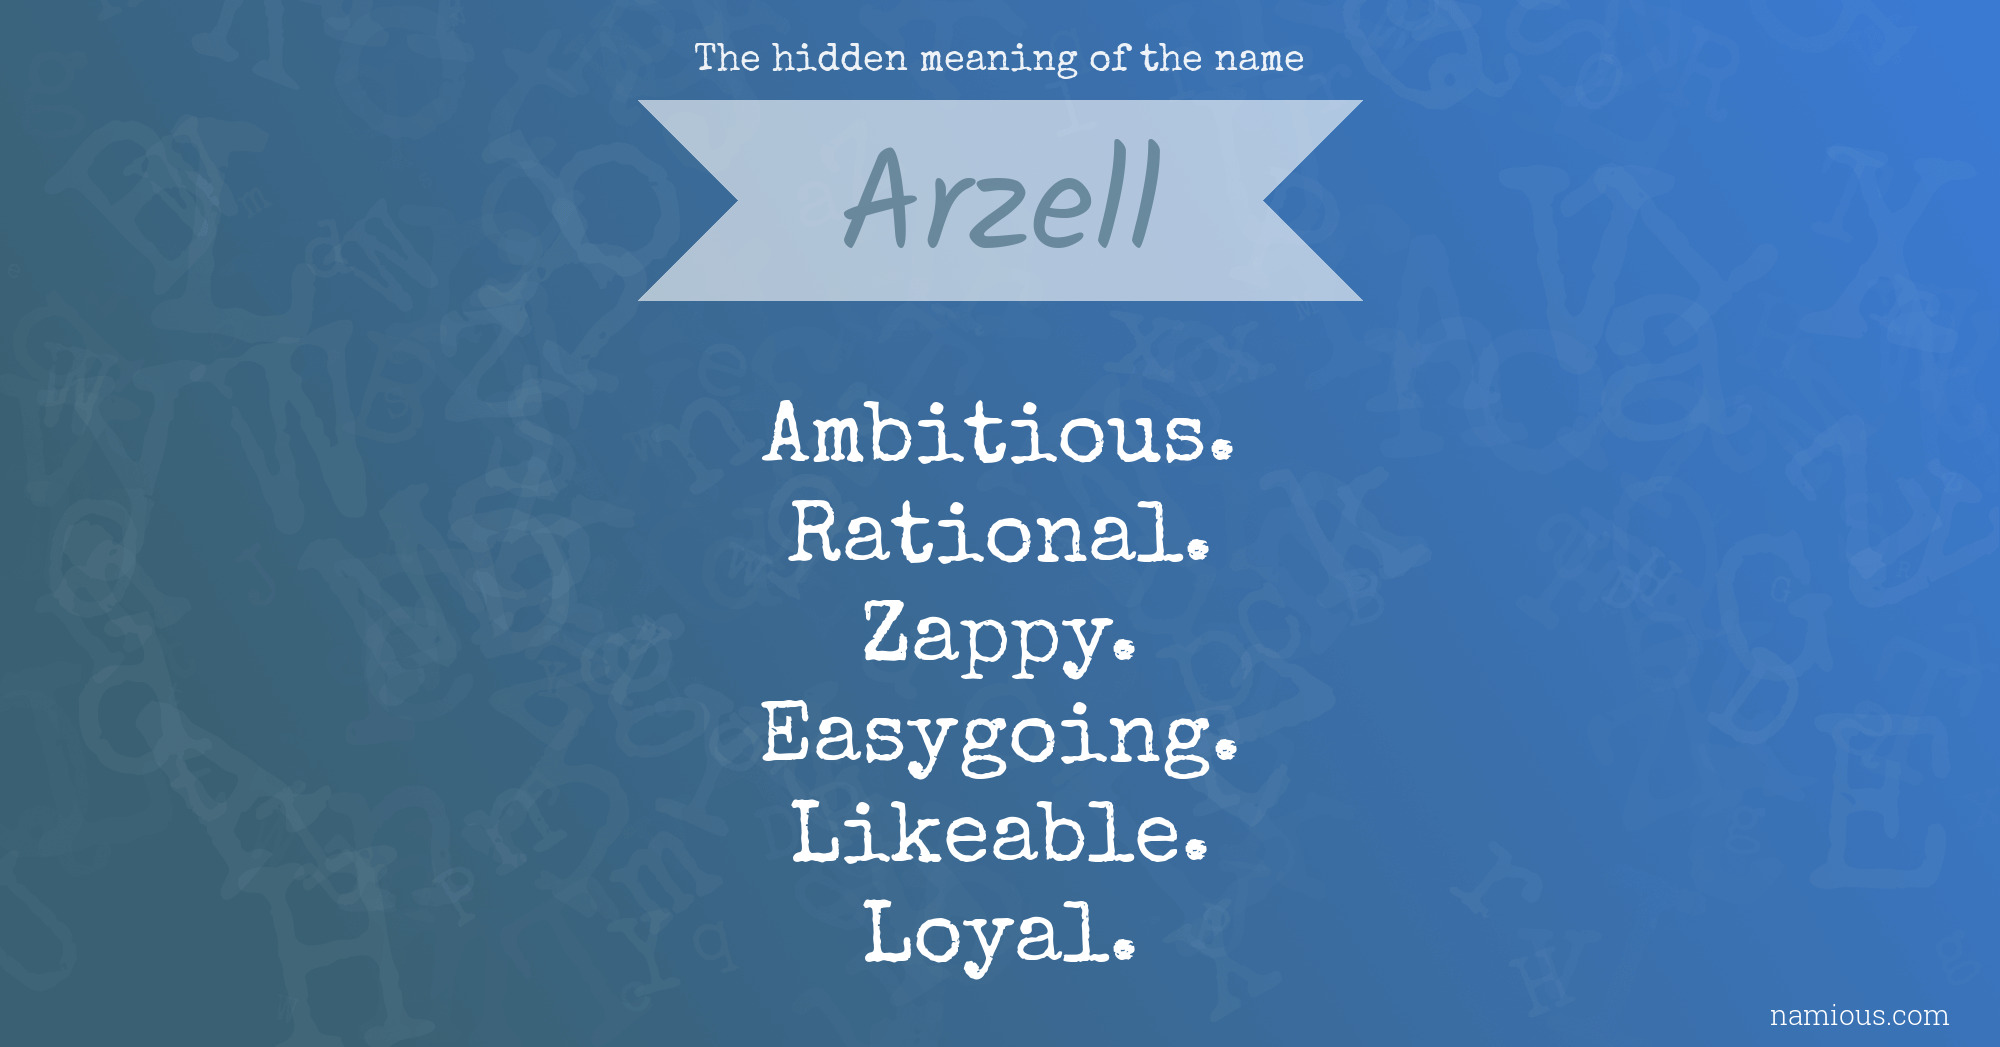 The hidden meaning of the name Arzell